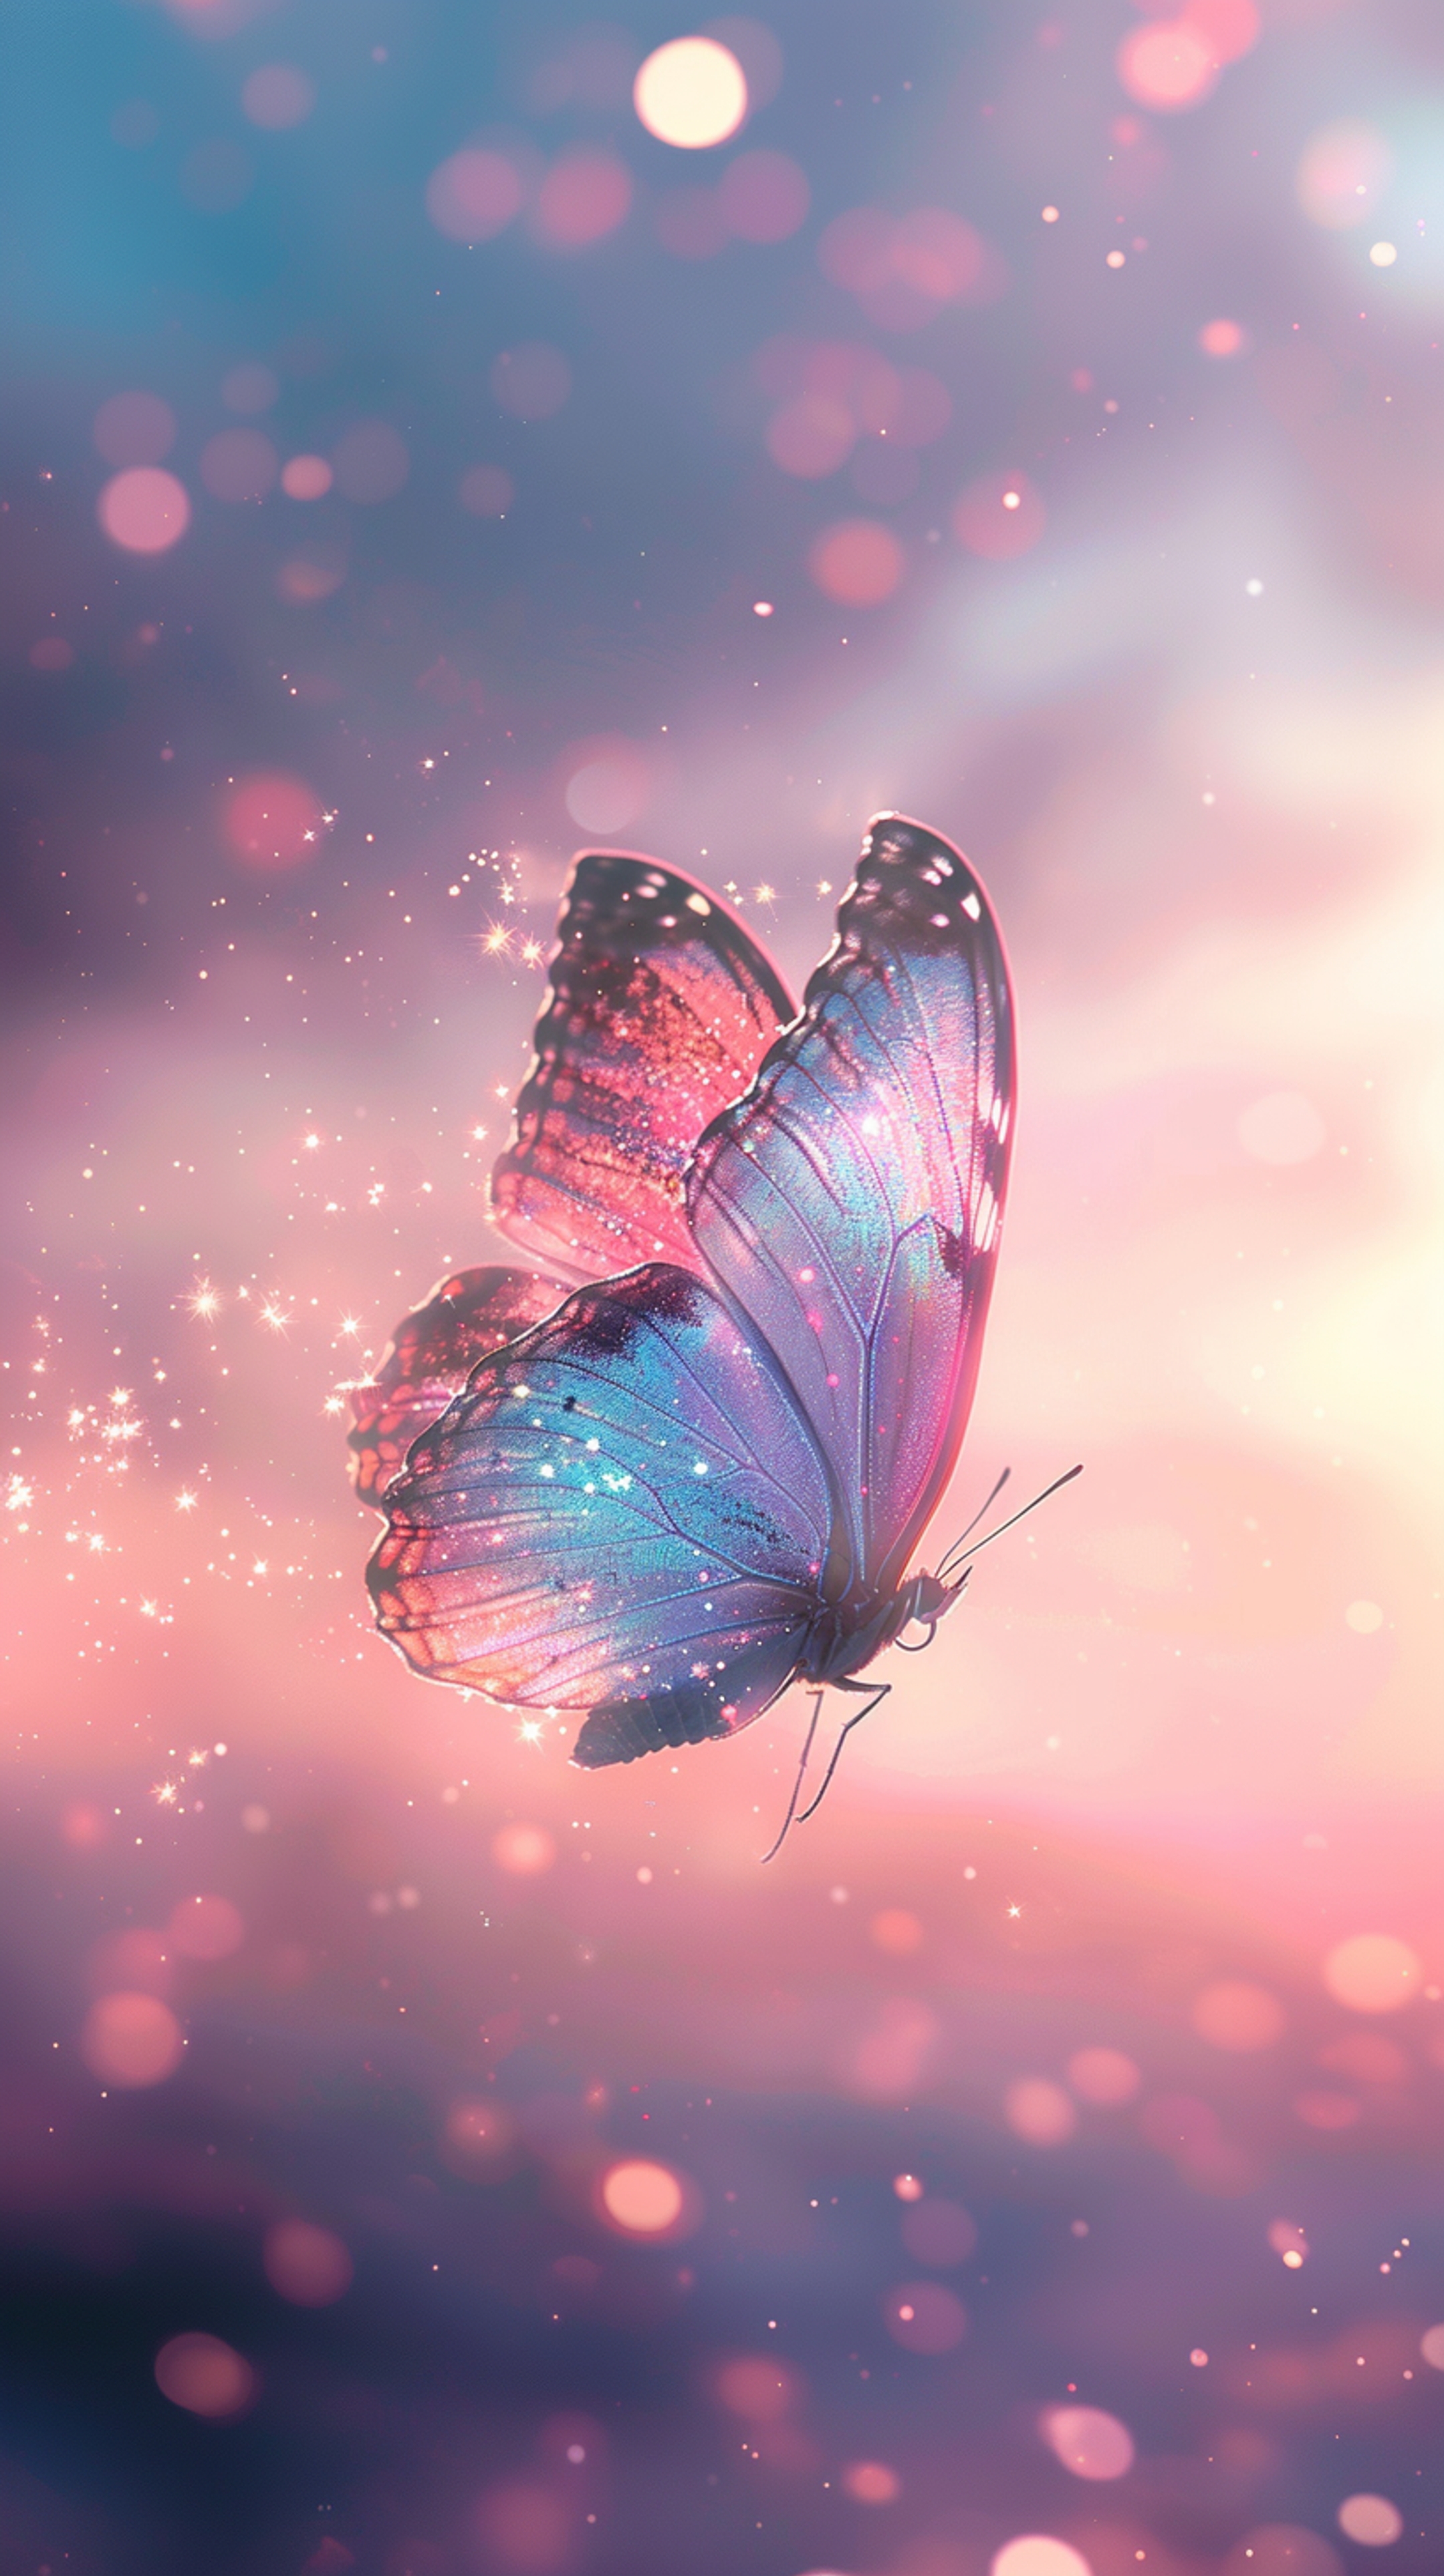 Magical Sparkling Butterfly in Dreamy Pink Sky Kertas dinding[1278b2409cd84640a5d9]